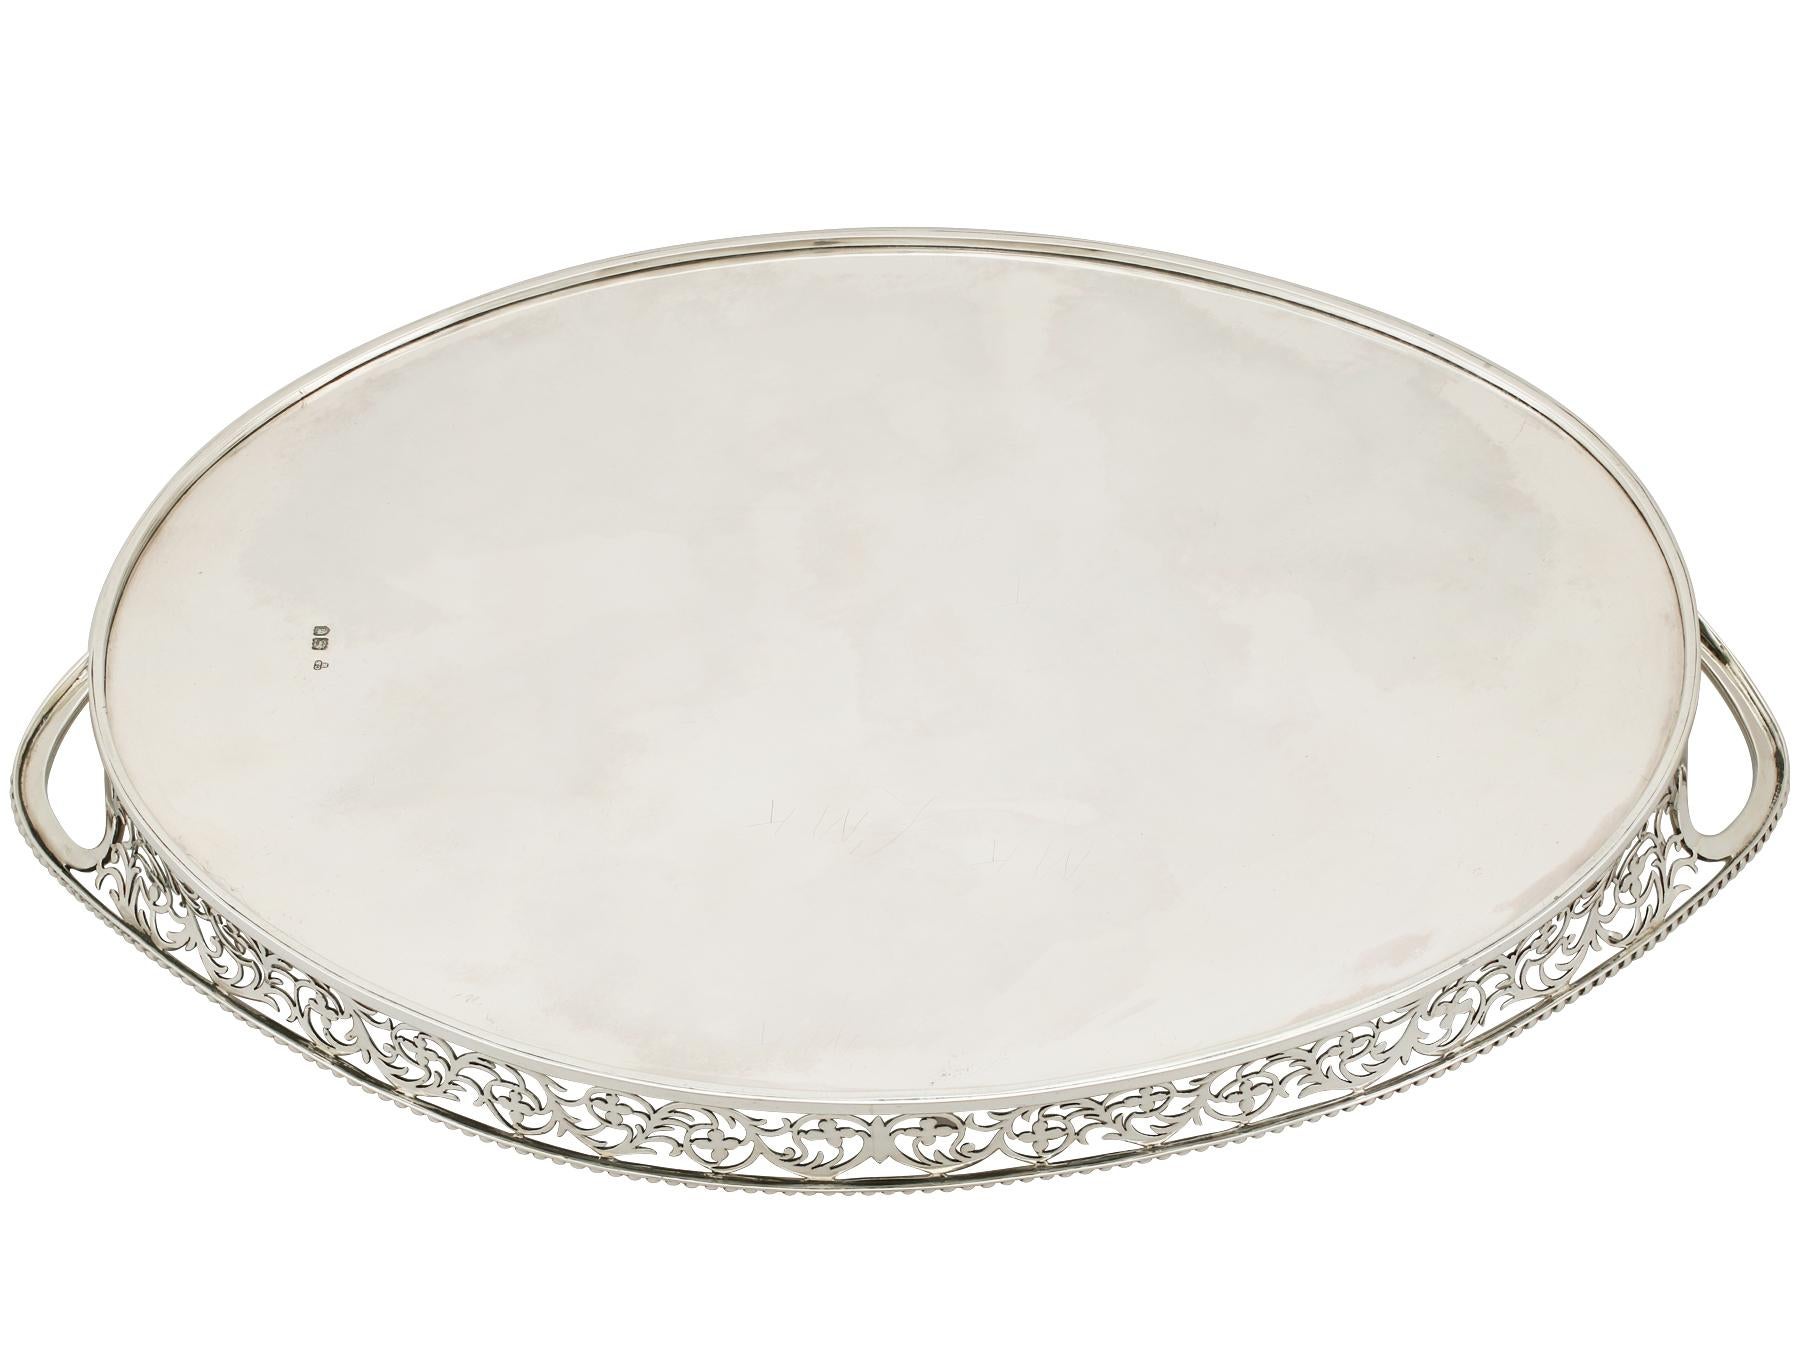 Edwardian English Sterling Silver Galleried Drinks Tray 1901 3